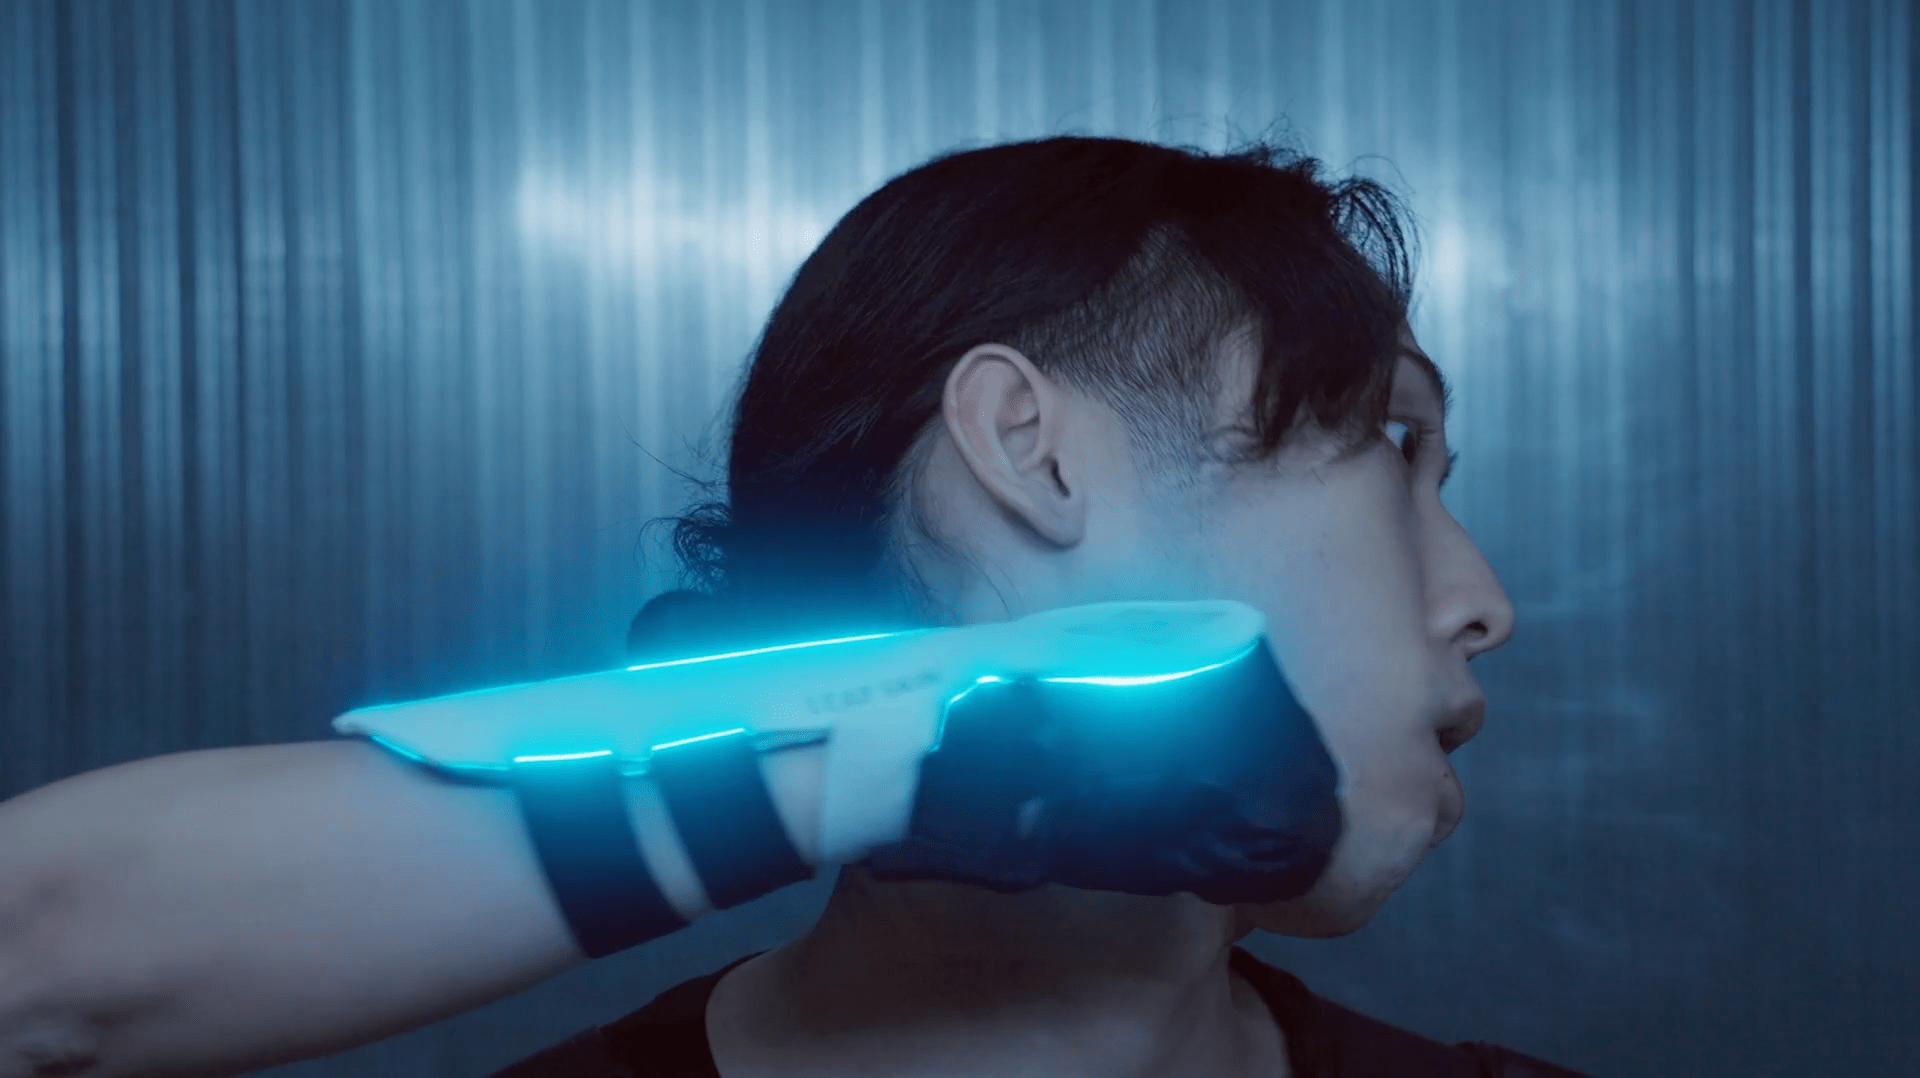 The "Haptic Metaverse Glove" lets you feel virtual punches and more